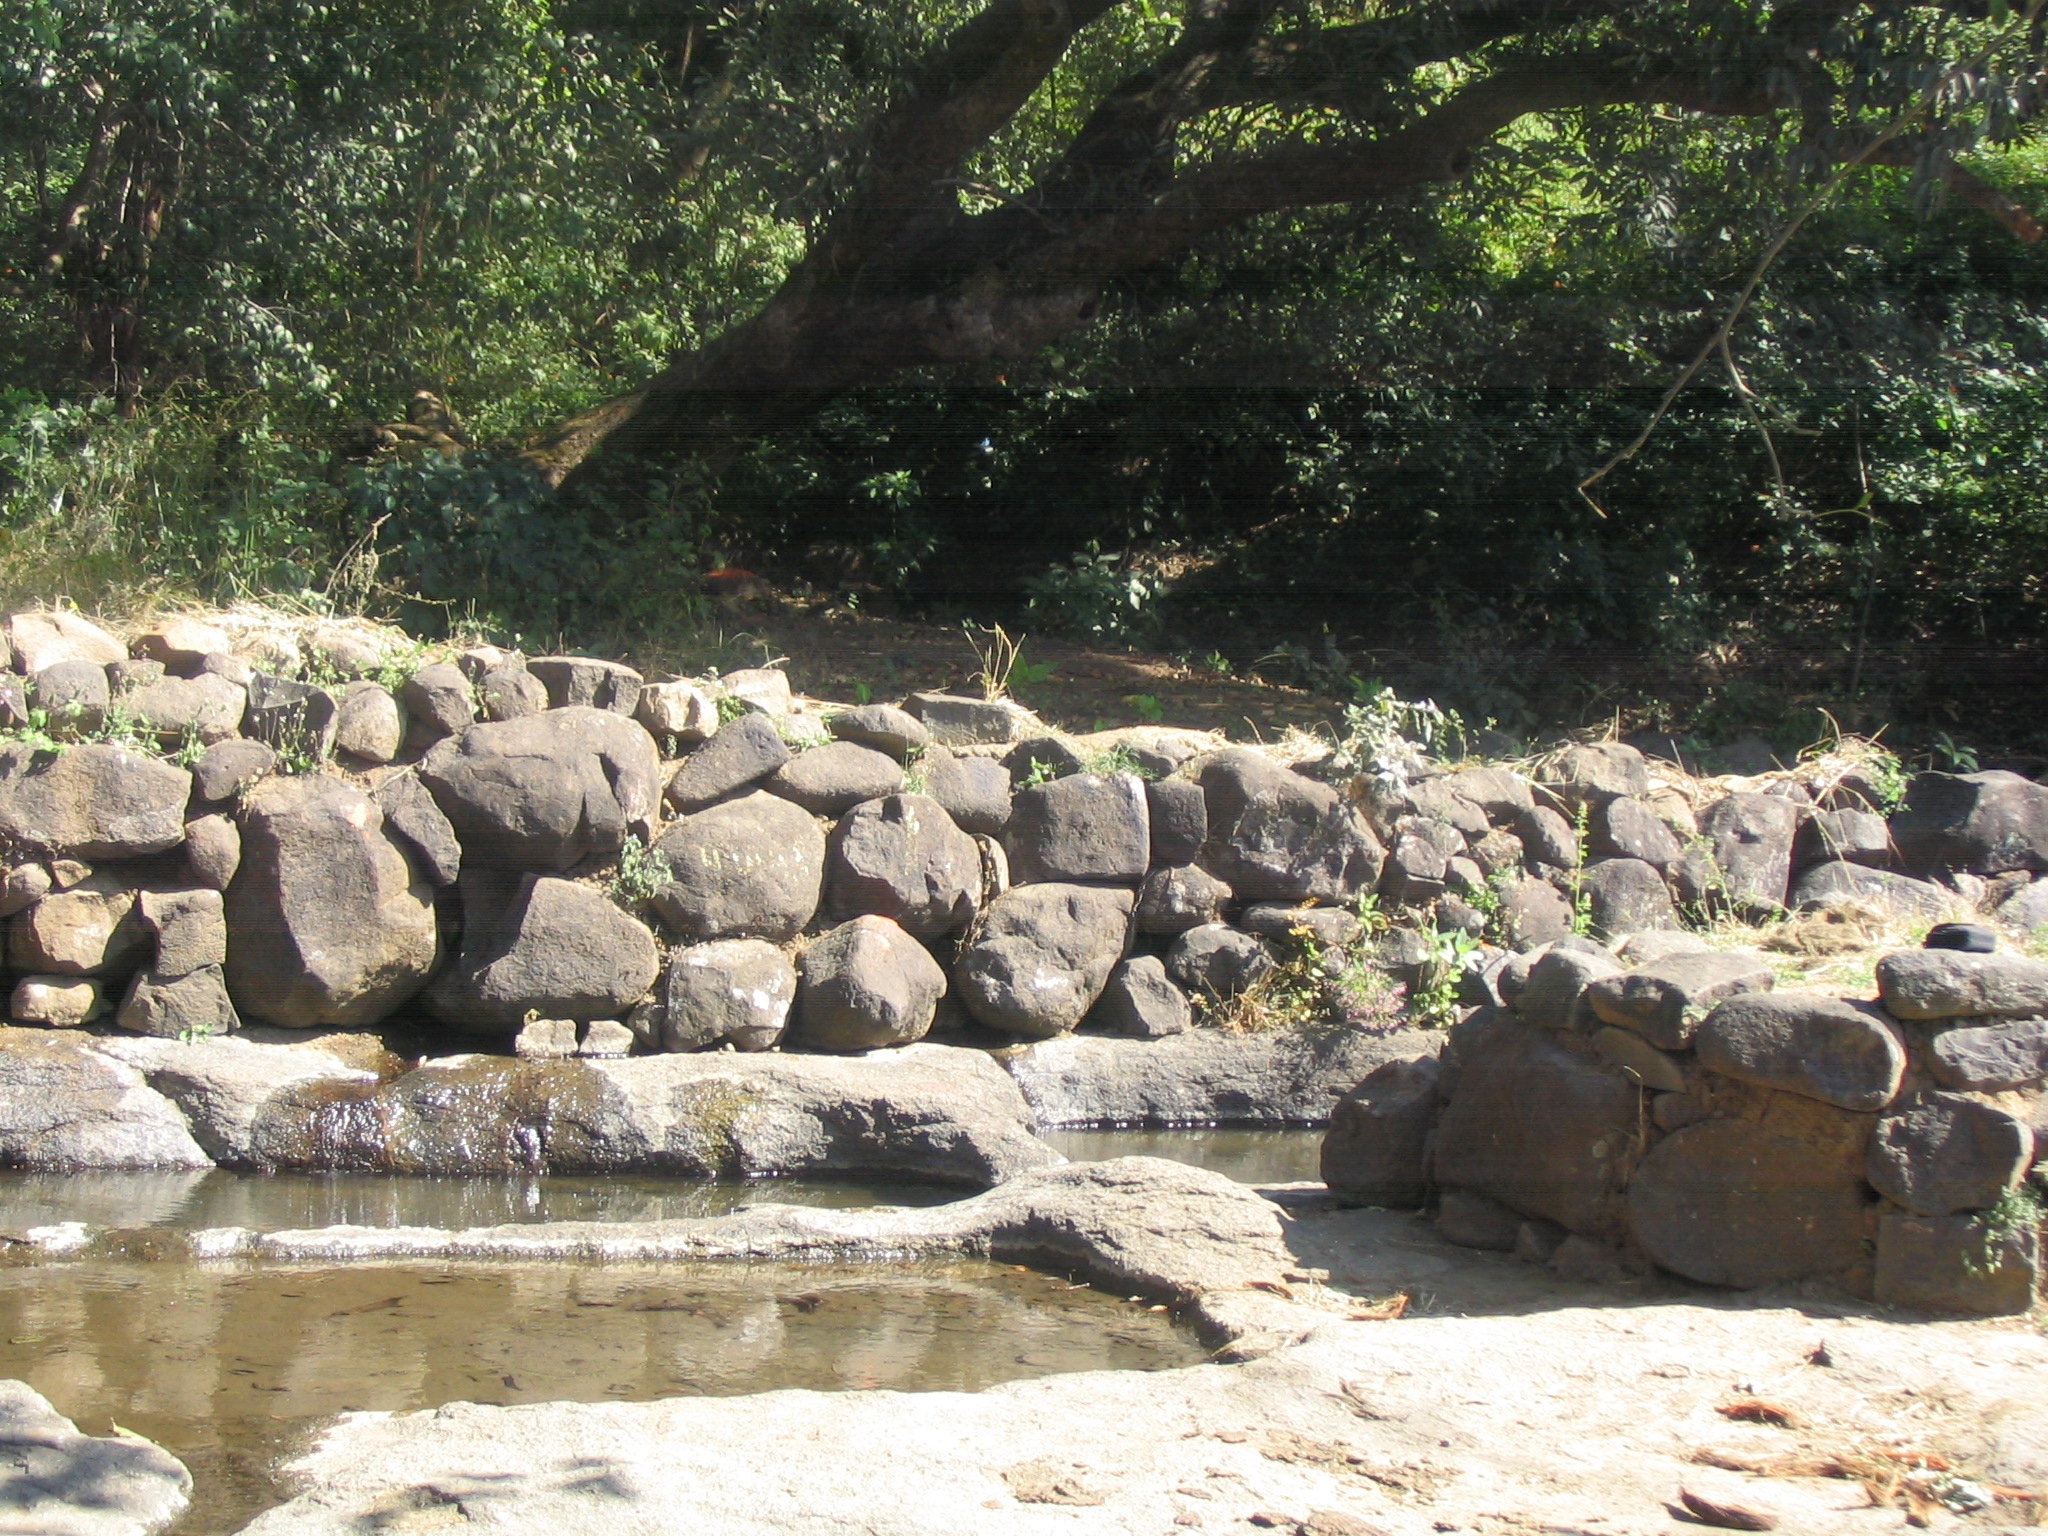 Like this spring in Chikalgaon, a village in the Western Ghats, structures built around springs traditionally have troughs for wildlife to drink from